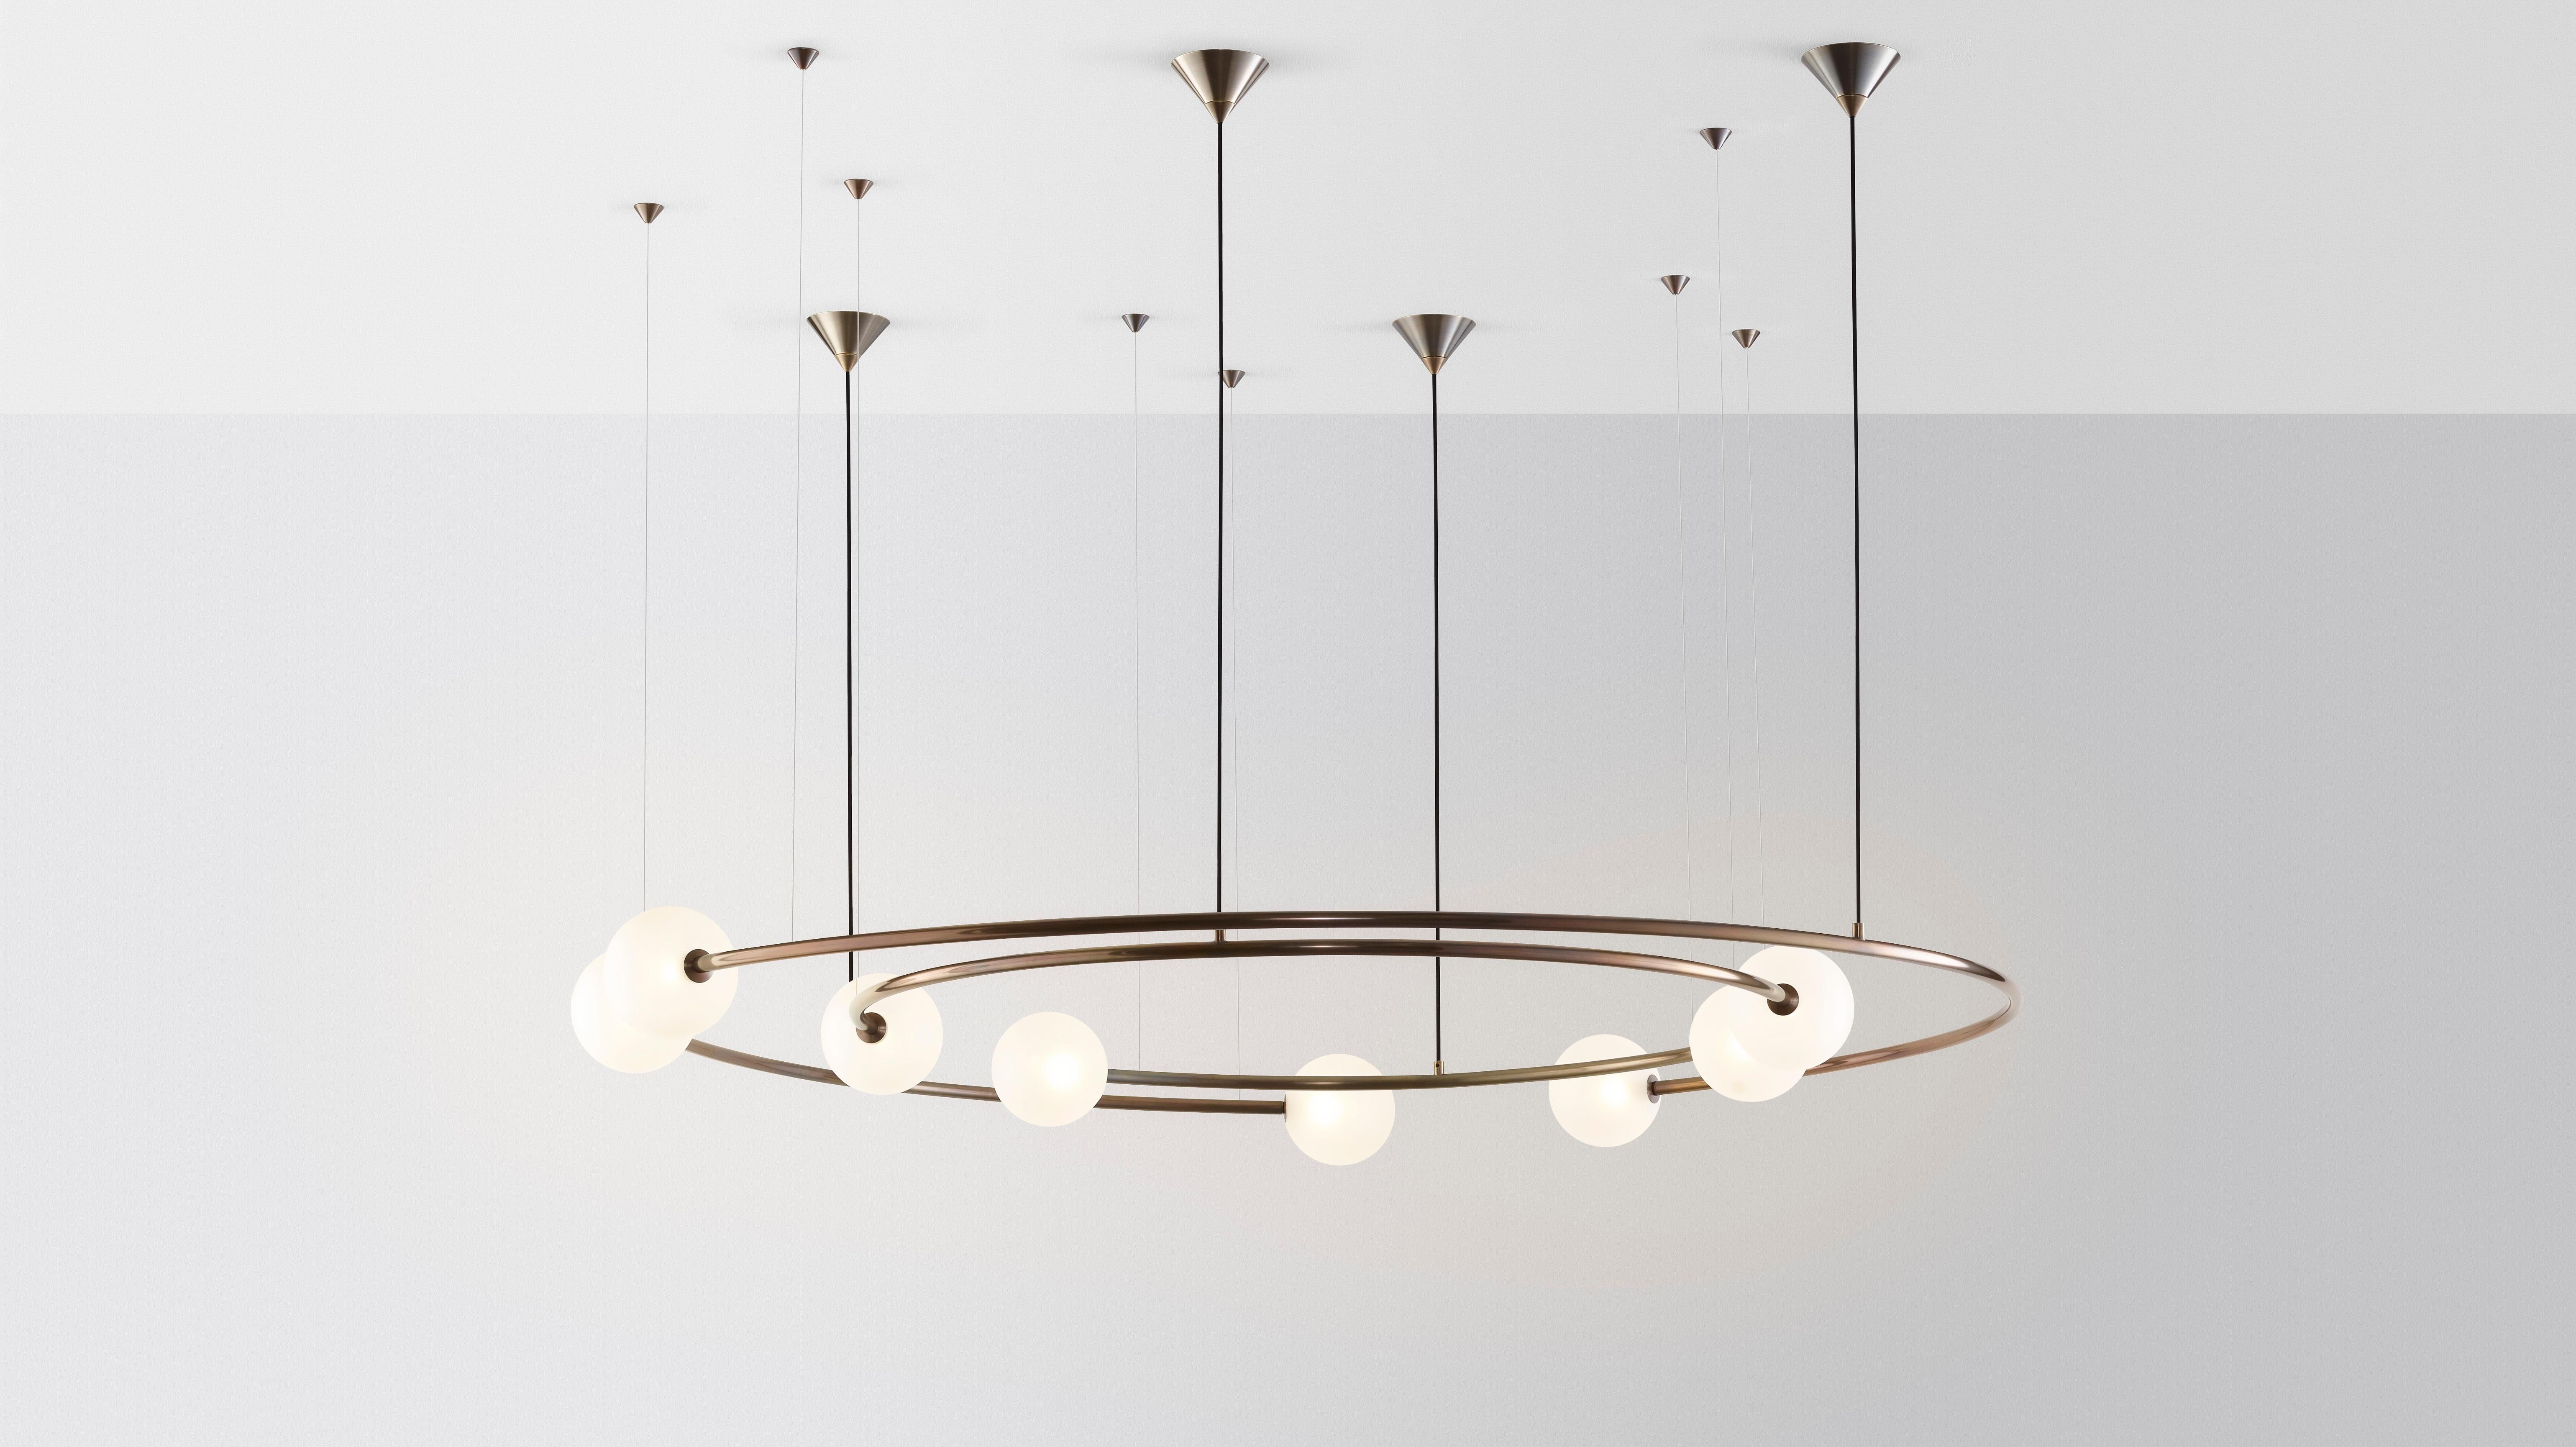 Oddments by Volker Haug. 
Dual ring Configuration.
Dimensions: W 95 D 160 H 40 cm.
Materials: Polished or bronzed brass
Finish: Raw, satin lacquer or enamel
Cord / cable: Black fabric / stainless steel
Suspension: minimum 40 cm

Lamp: G9 -